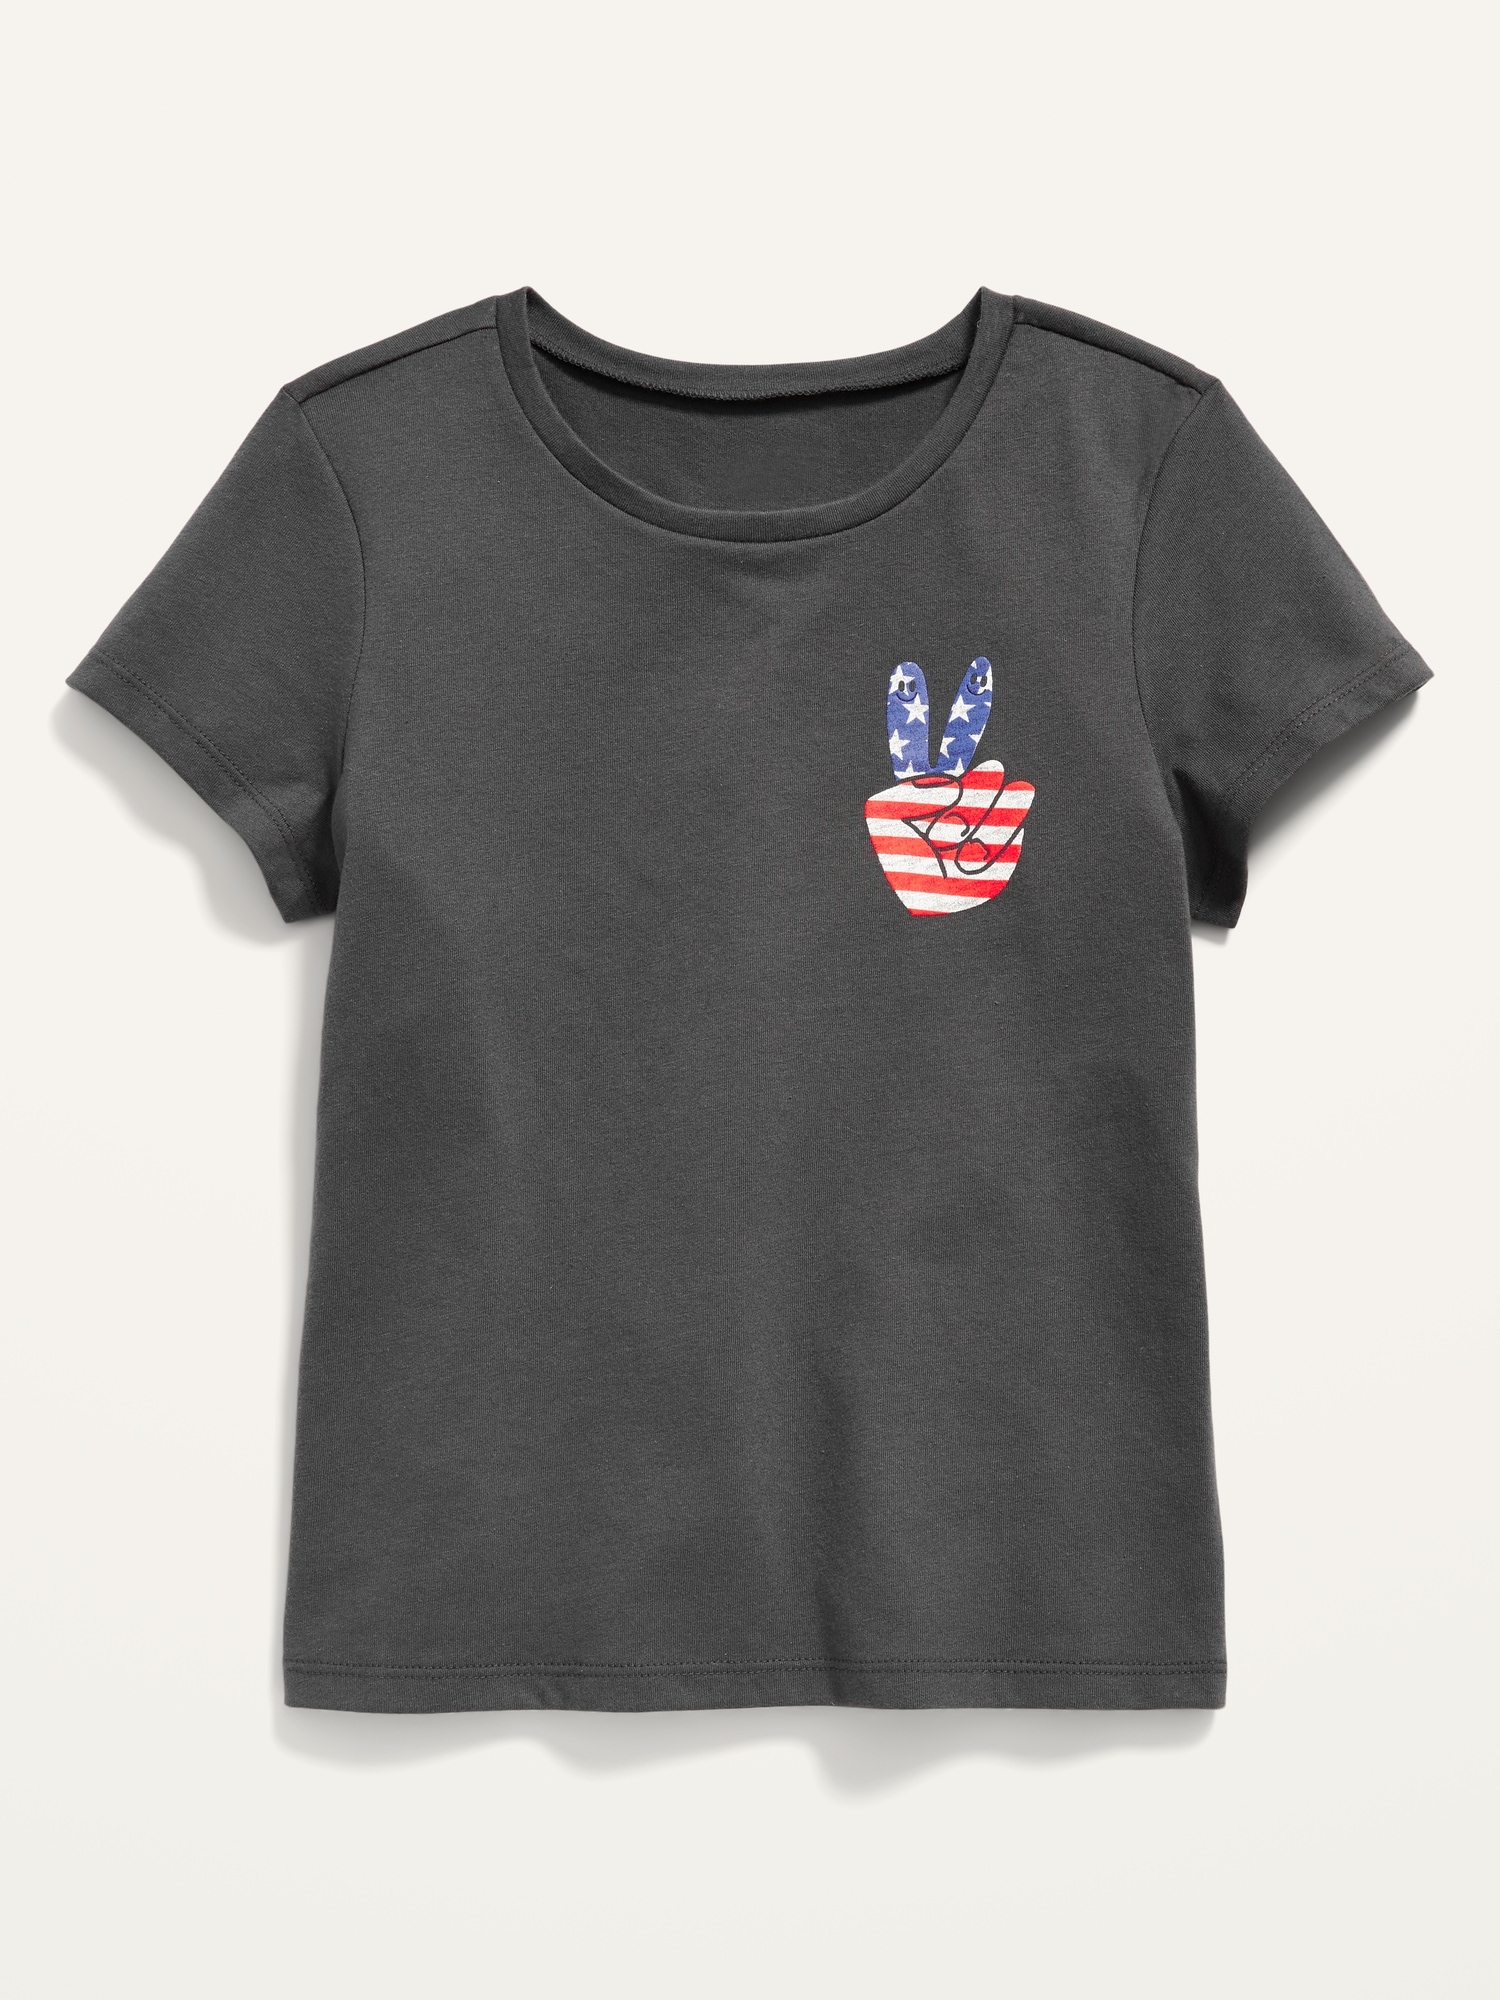 Matching Short-Sleeve Graphic T-Shirt for Girls | Old Navy